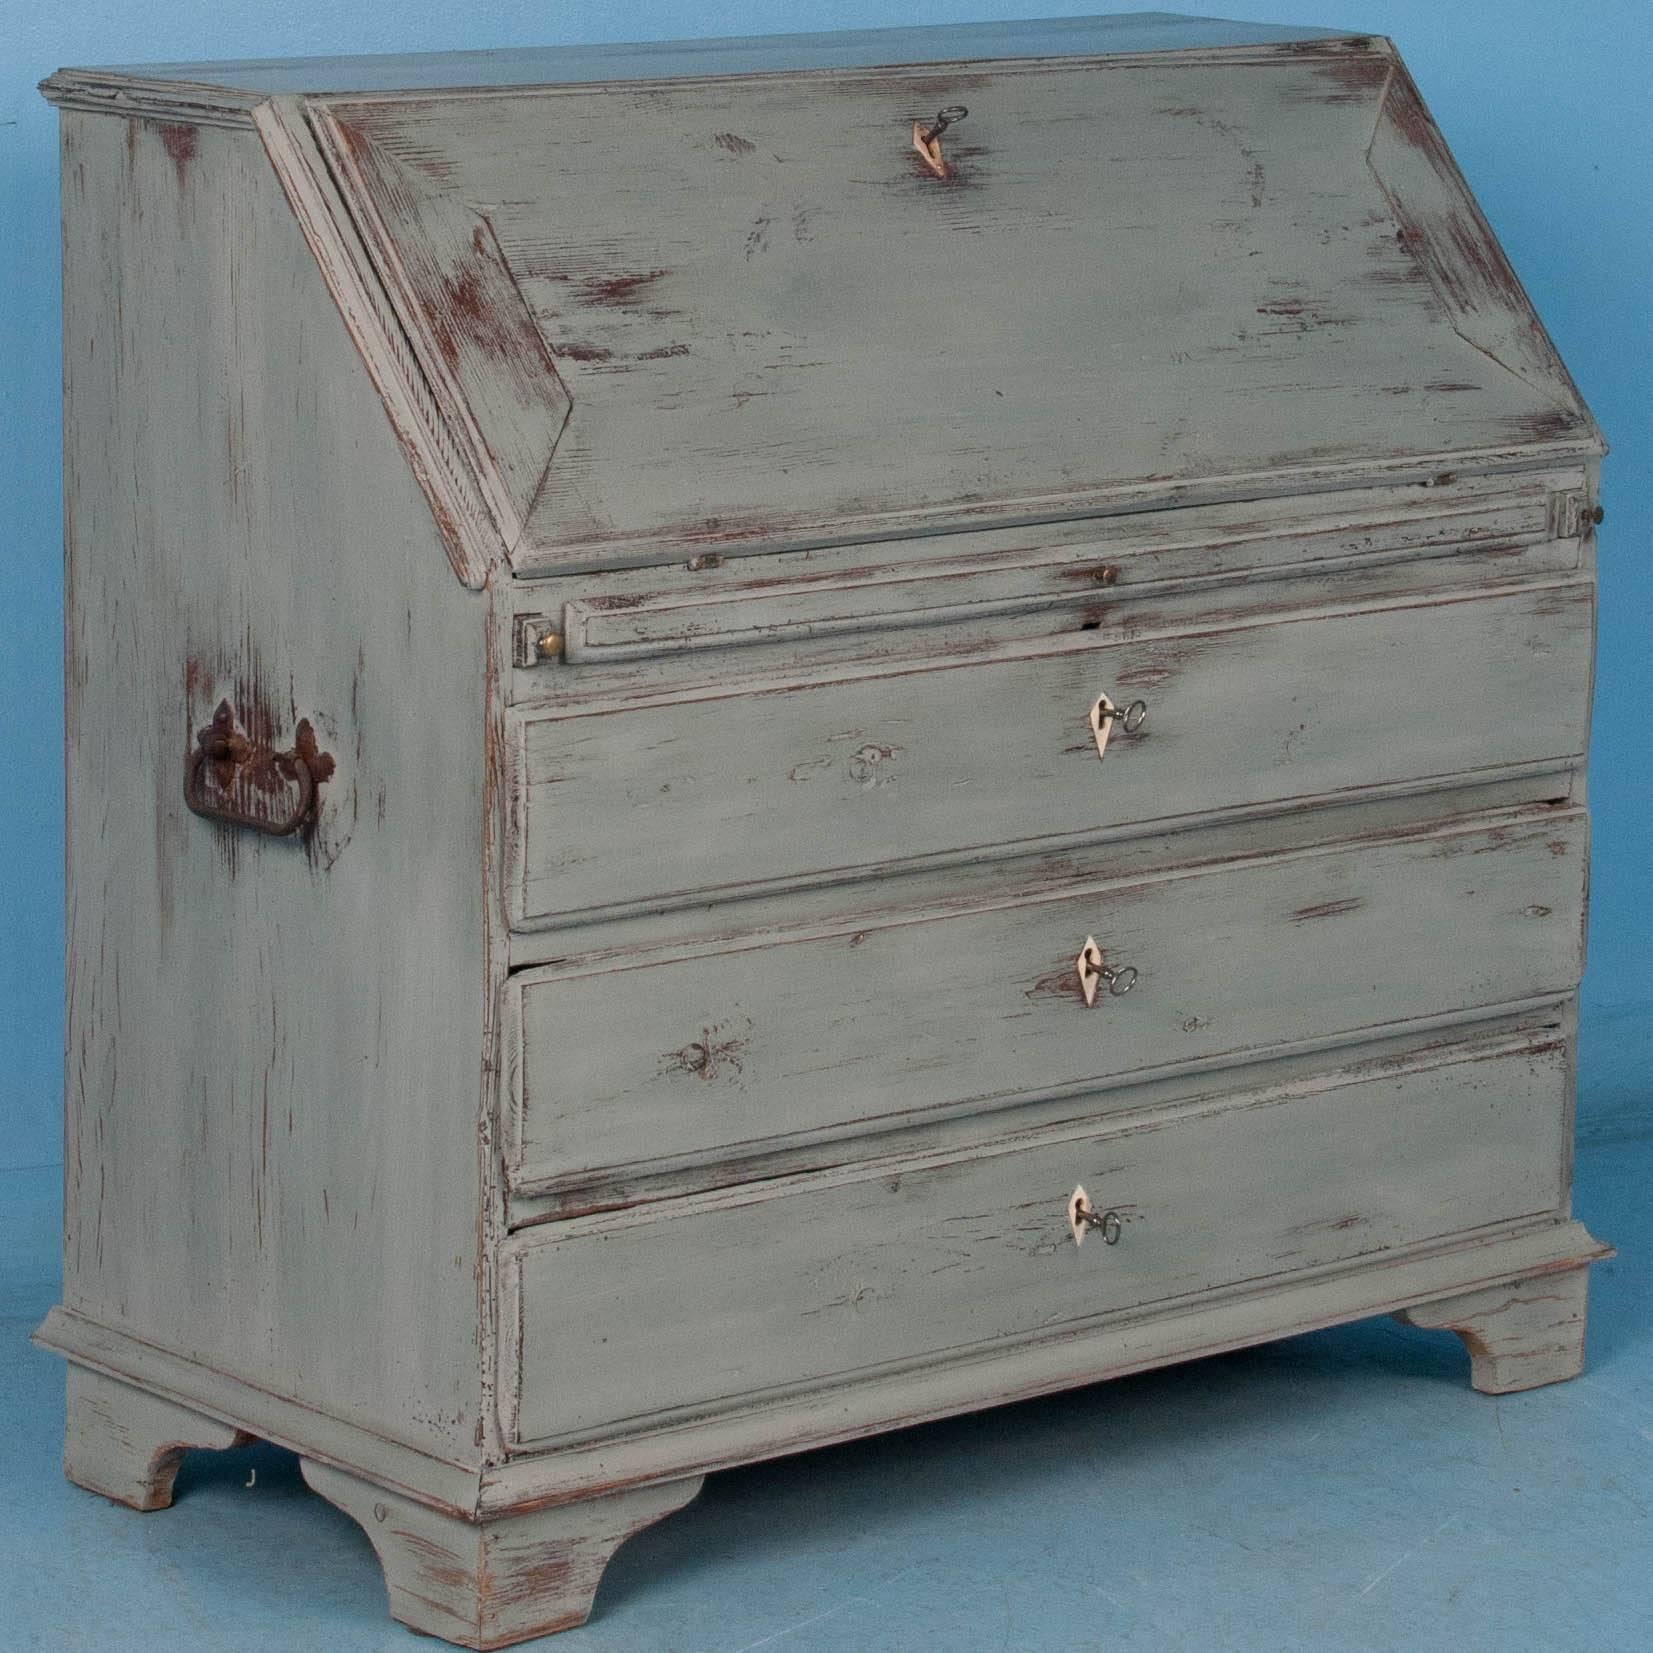 One can imagine this secretary or drop front desk gracing a European lady's country home in the 1840s. Gray was popular in the Gustavian Style, so this desk was given a dove gray chalk paint finish to compliment its Swedish roots. In the photos, see